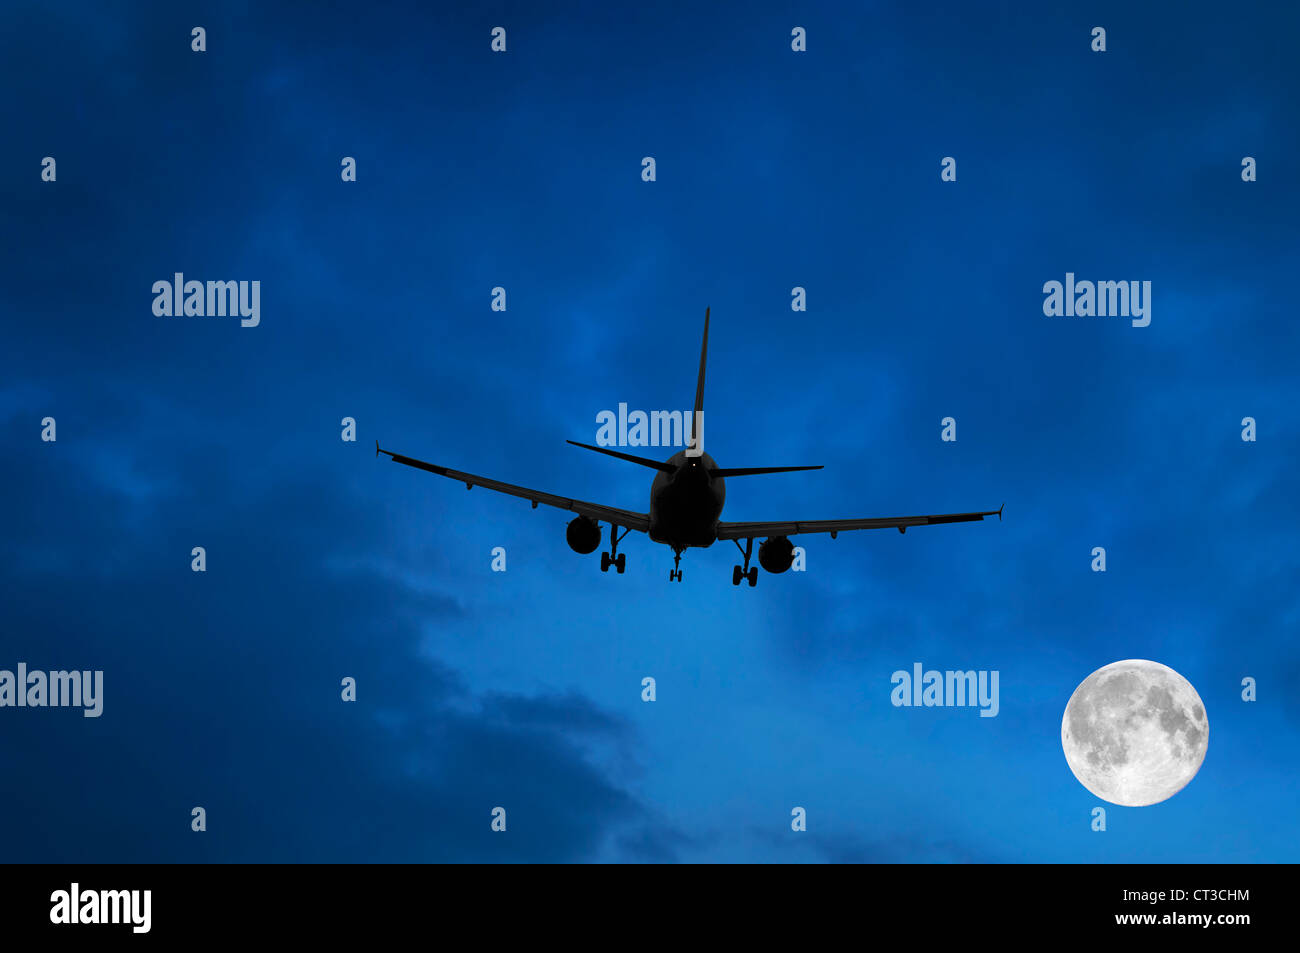 Airplane and Moon in Blue Sky Stock Photo